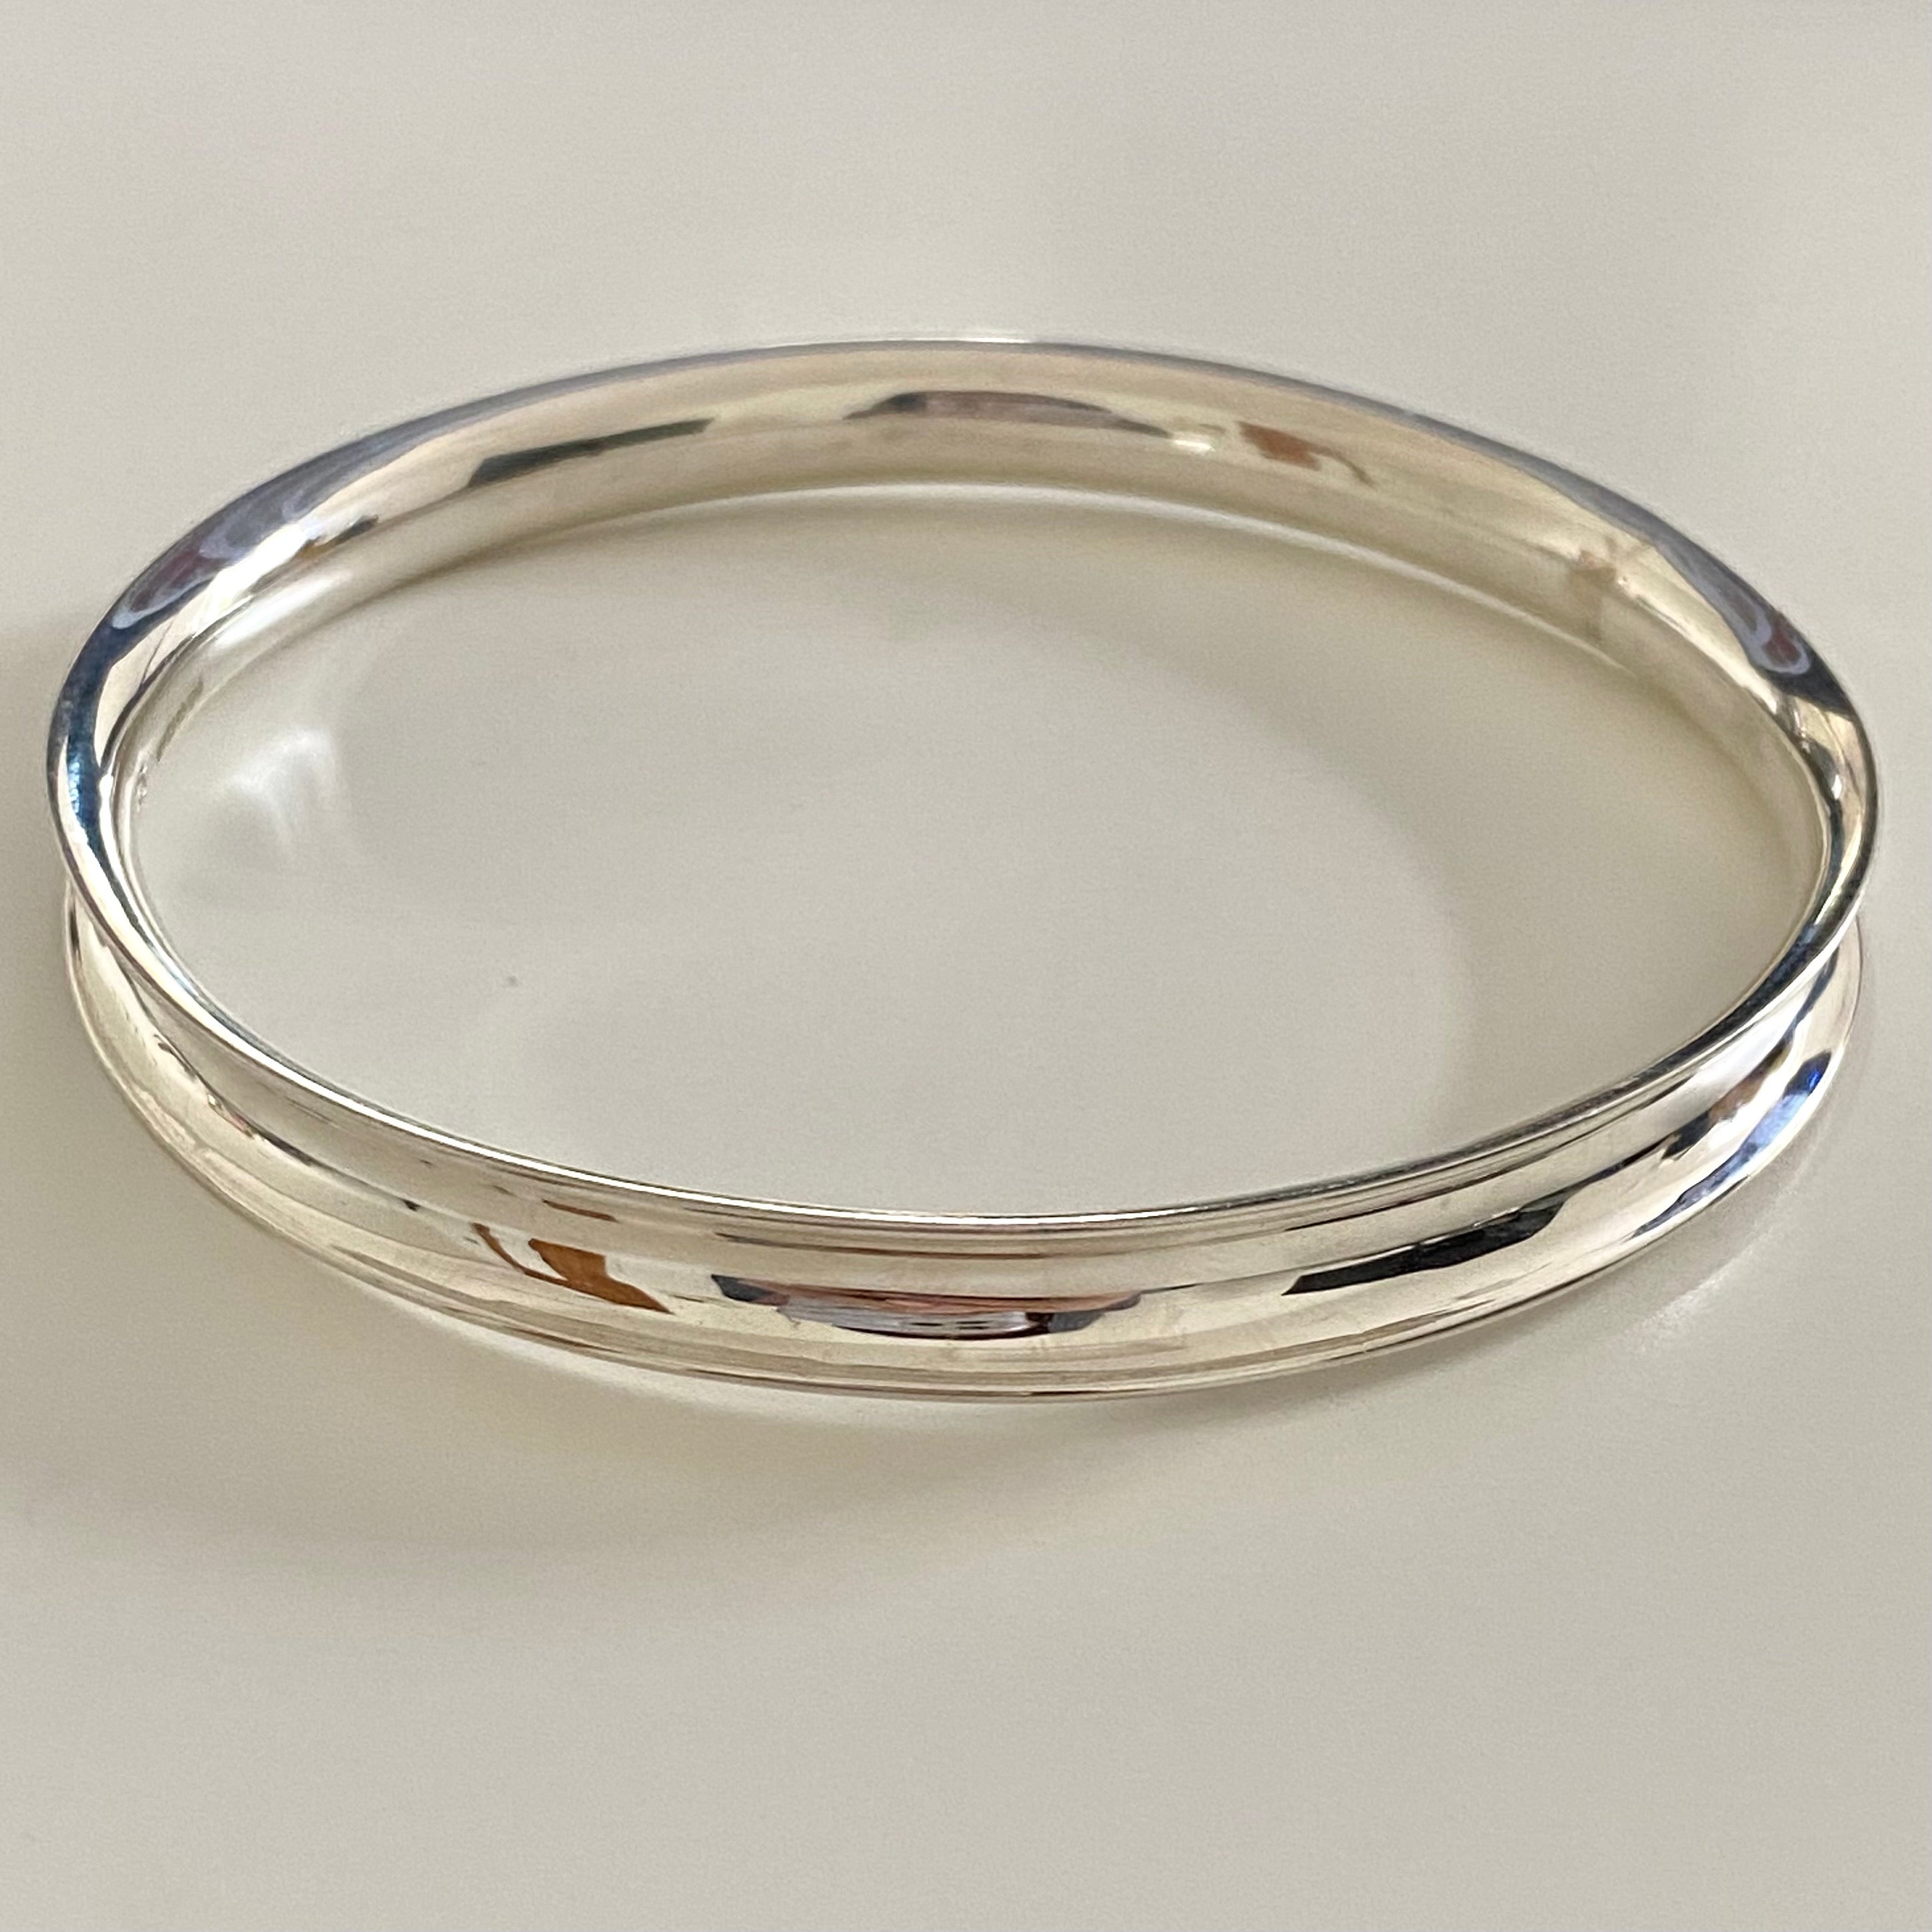 Chunky Sterling Silver 7mm wide Concave Bangle with a Polished Shiny Finish